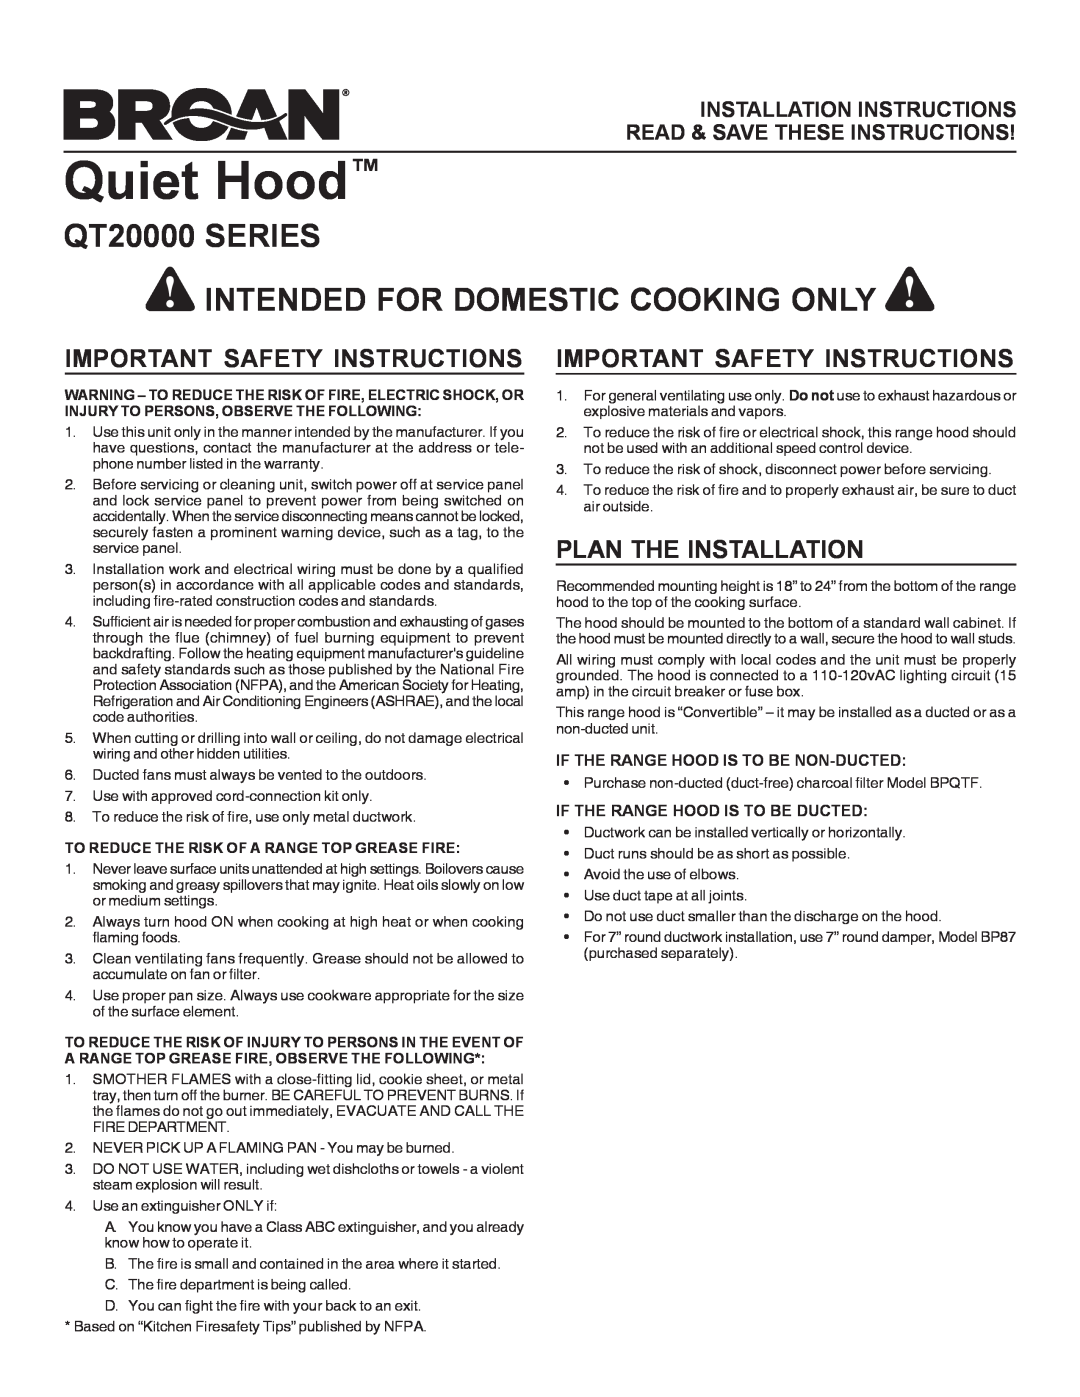 Broan QT230WW installation instructions Quiet Hood, QT20000 SERIES INTENDED FOR DOMESTIC COOKING ONLY 